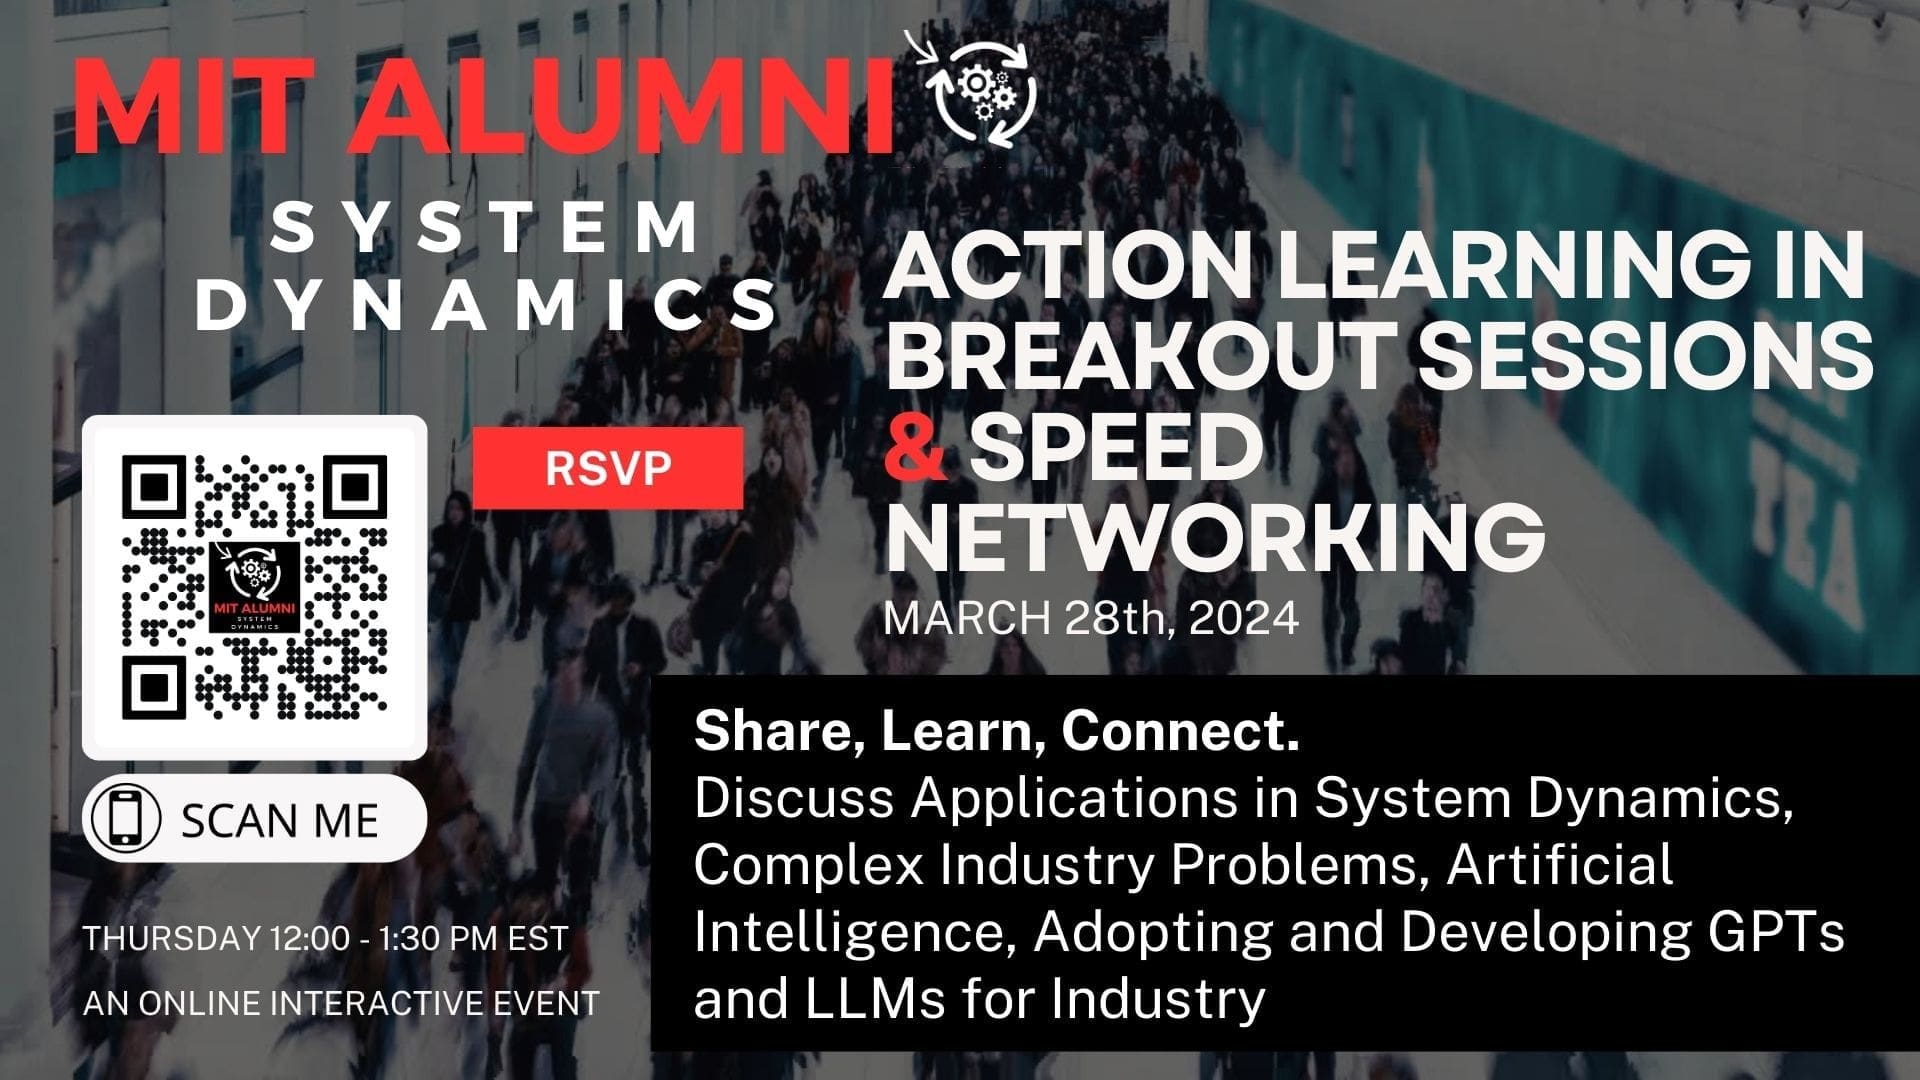 MIT Alumni System Dynamics: Action Learning in Breakout Sessions & Speed Networking